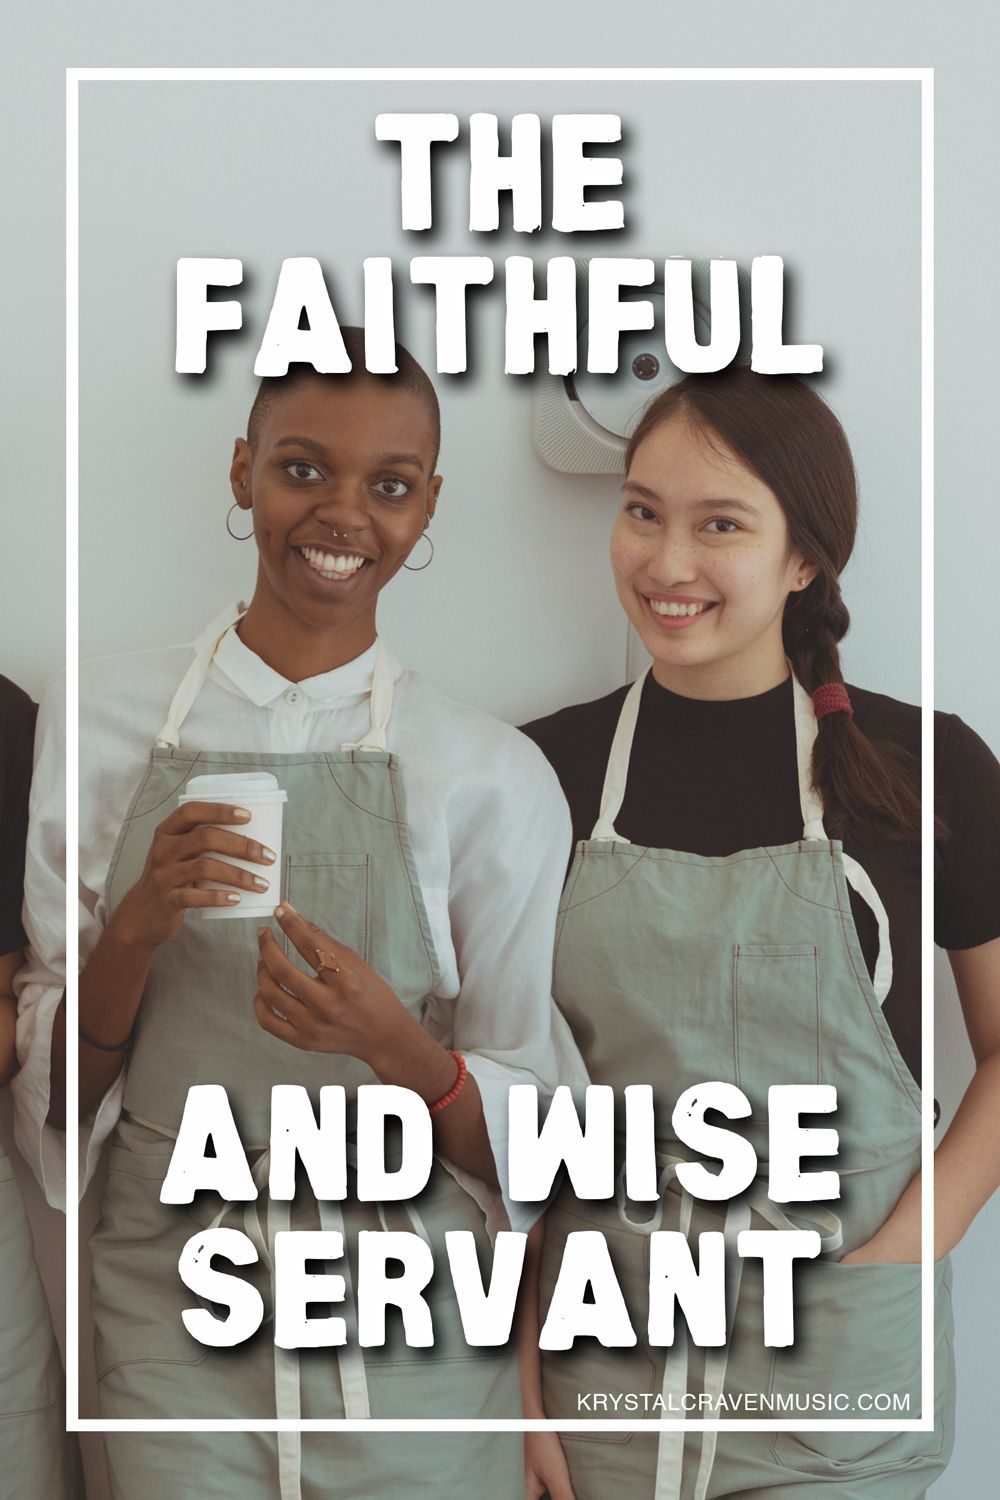 The title text "The Faithful and Wise Servant" over two baristas smiling and wearing aprons.